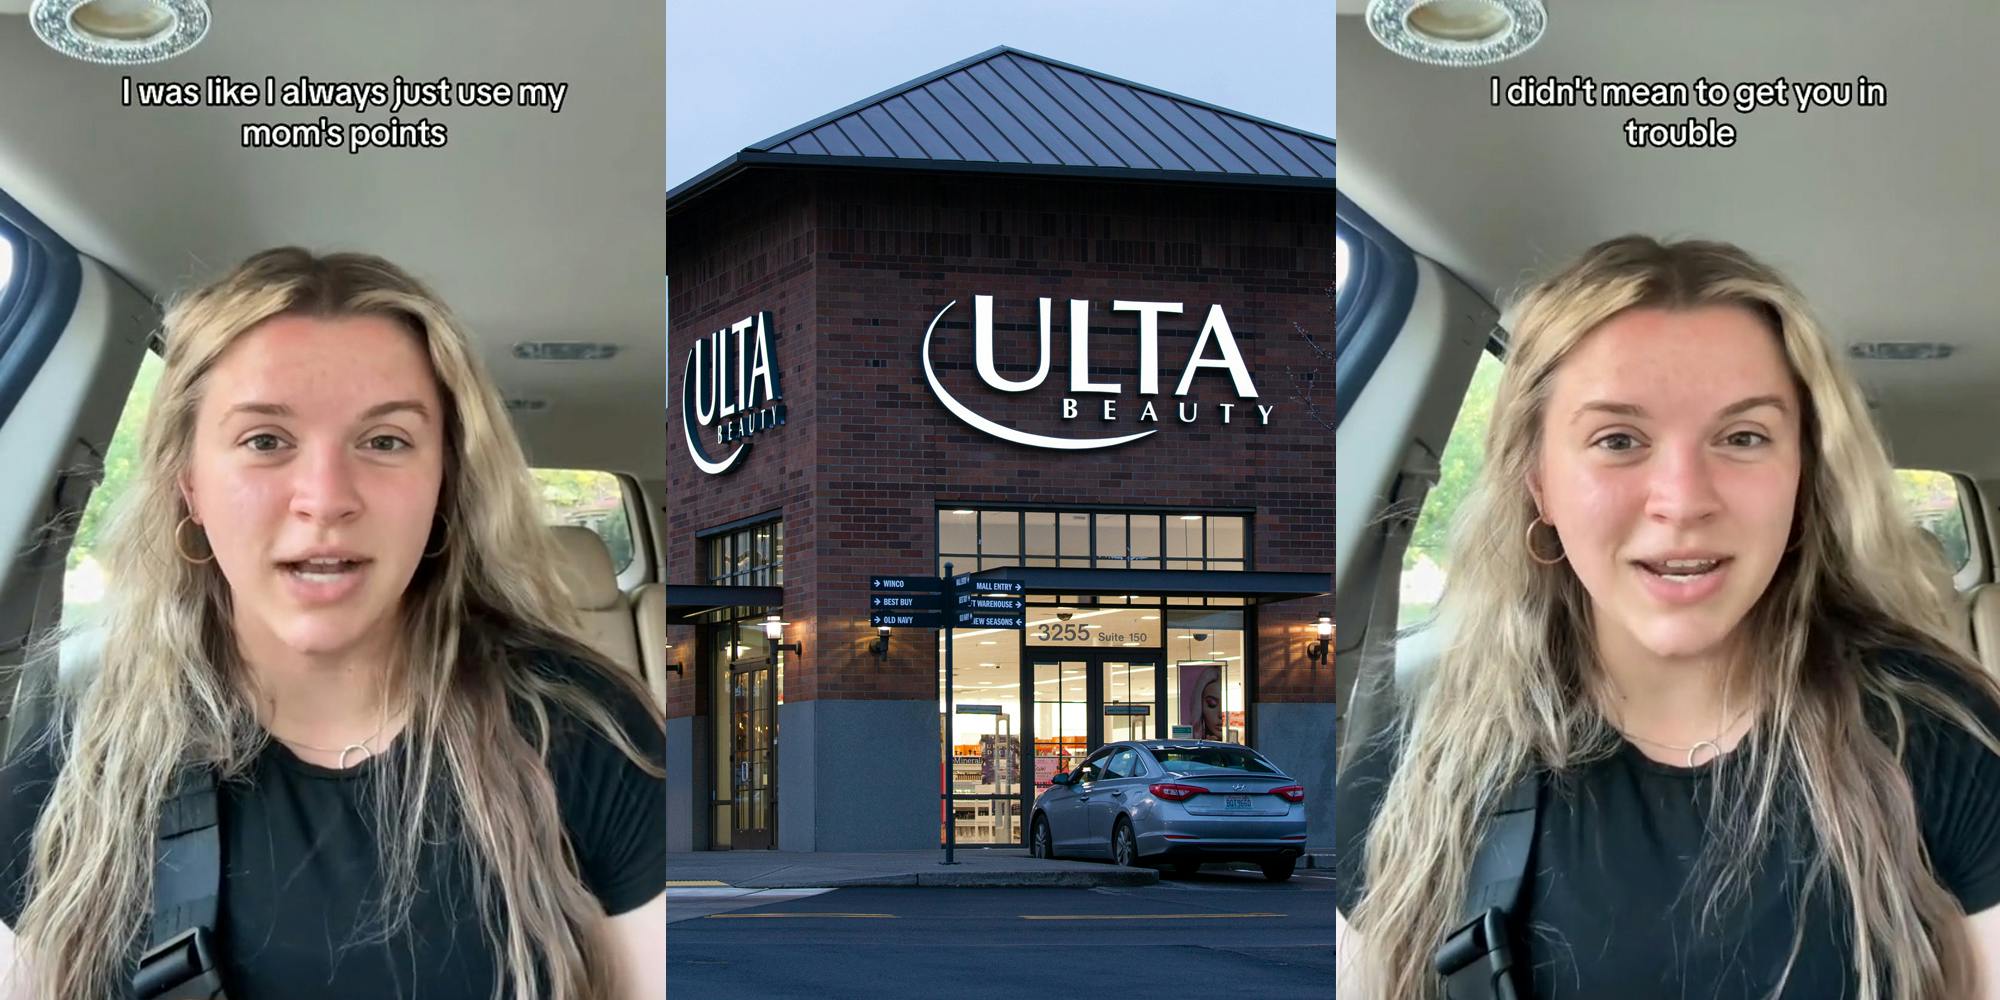 Ulta customer speaking in car with caption "I was like I always just use my mom's points" (l) Ulta building with signs (c) Ulta customer speaking in car with caption "I didn't mean to get you in trouble" (r)